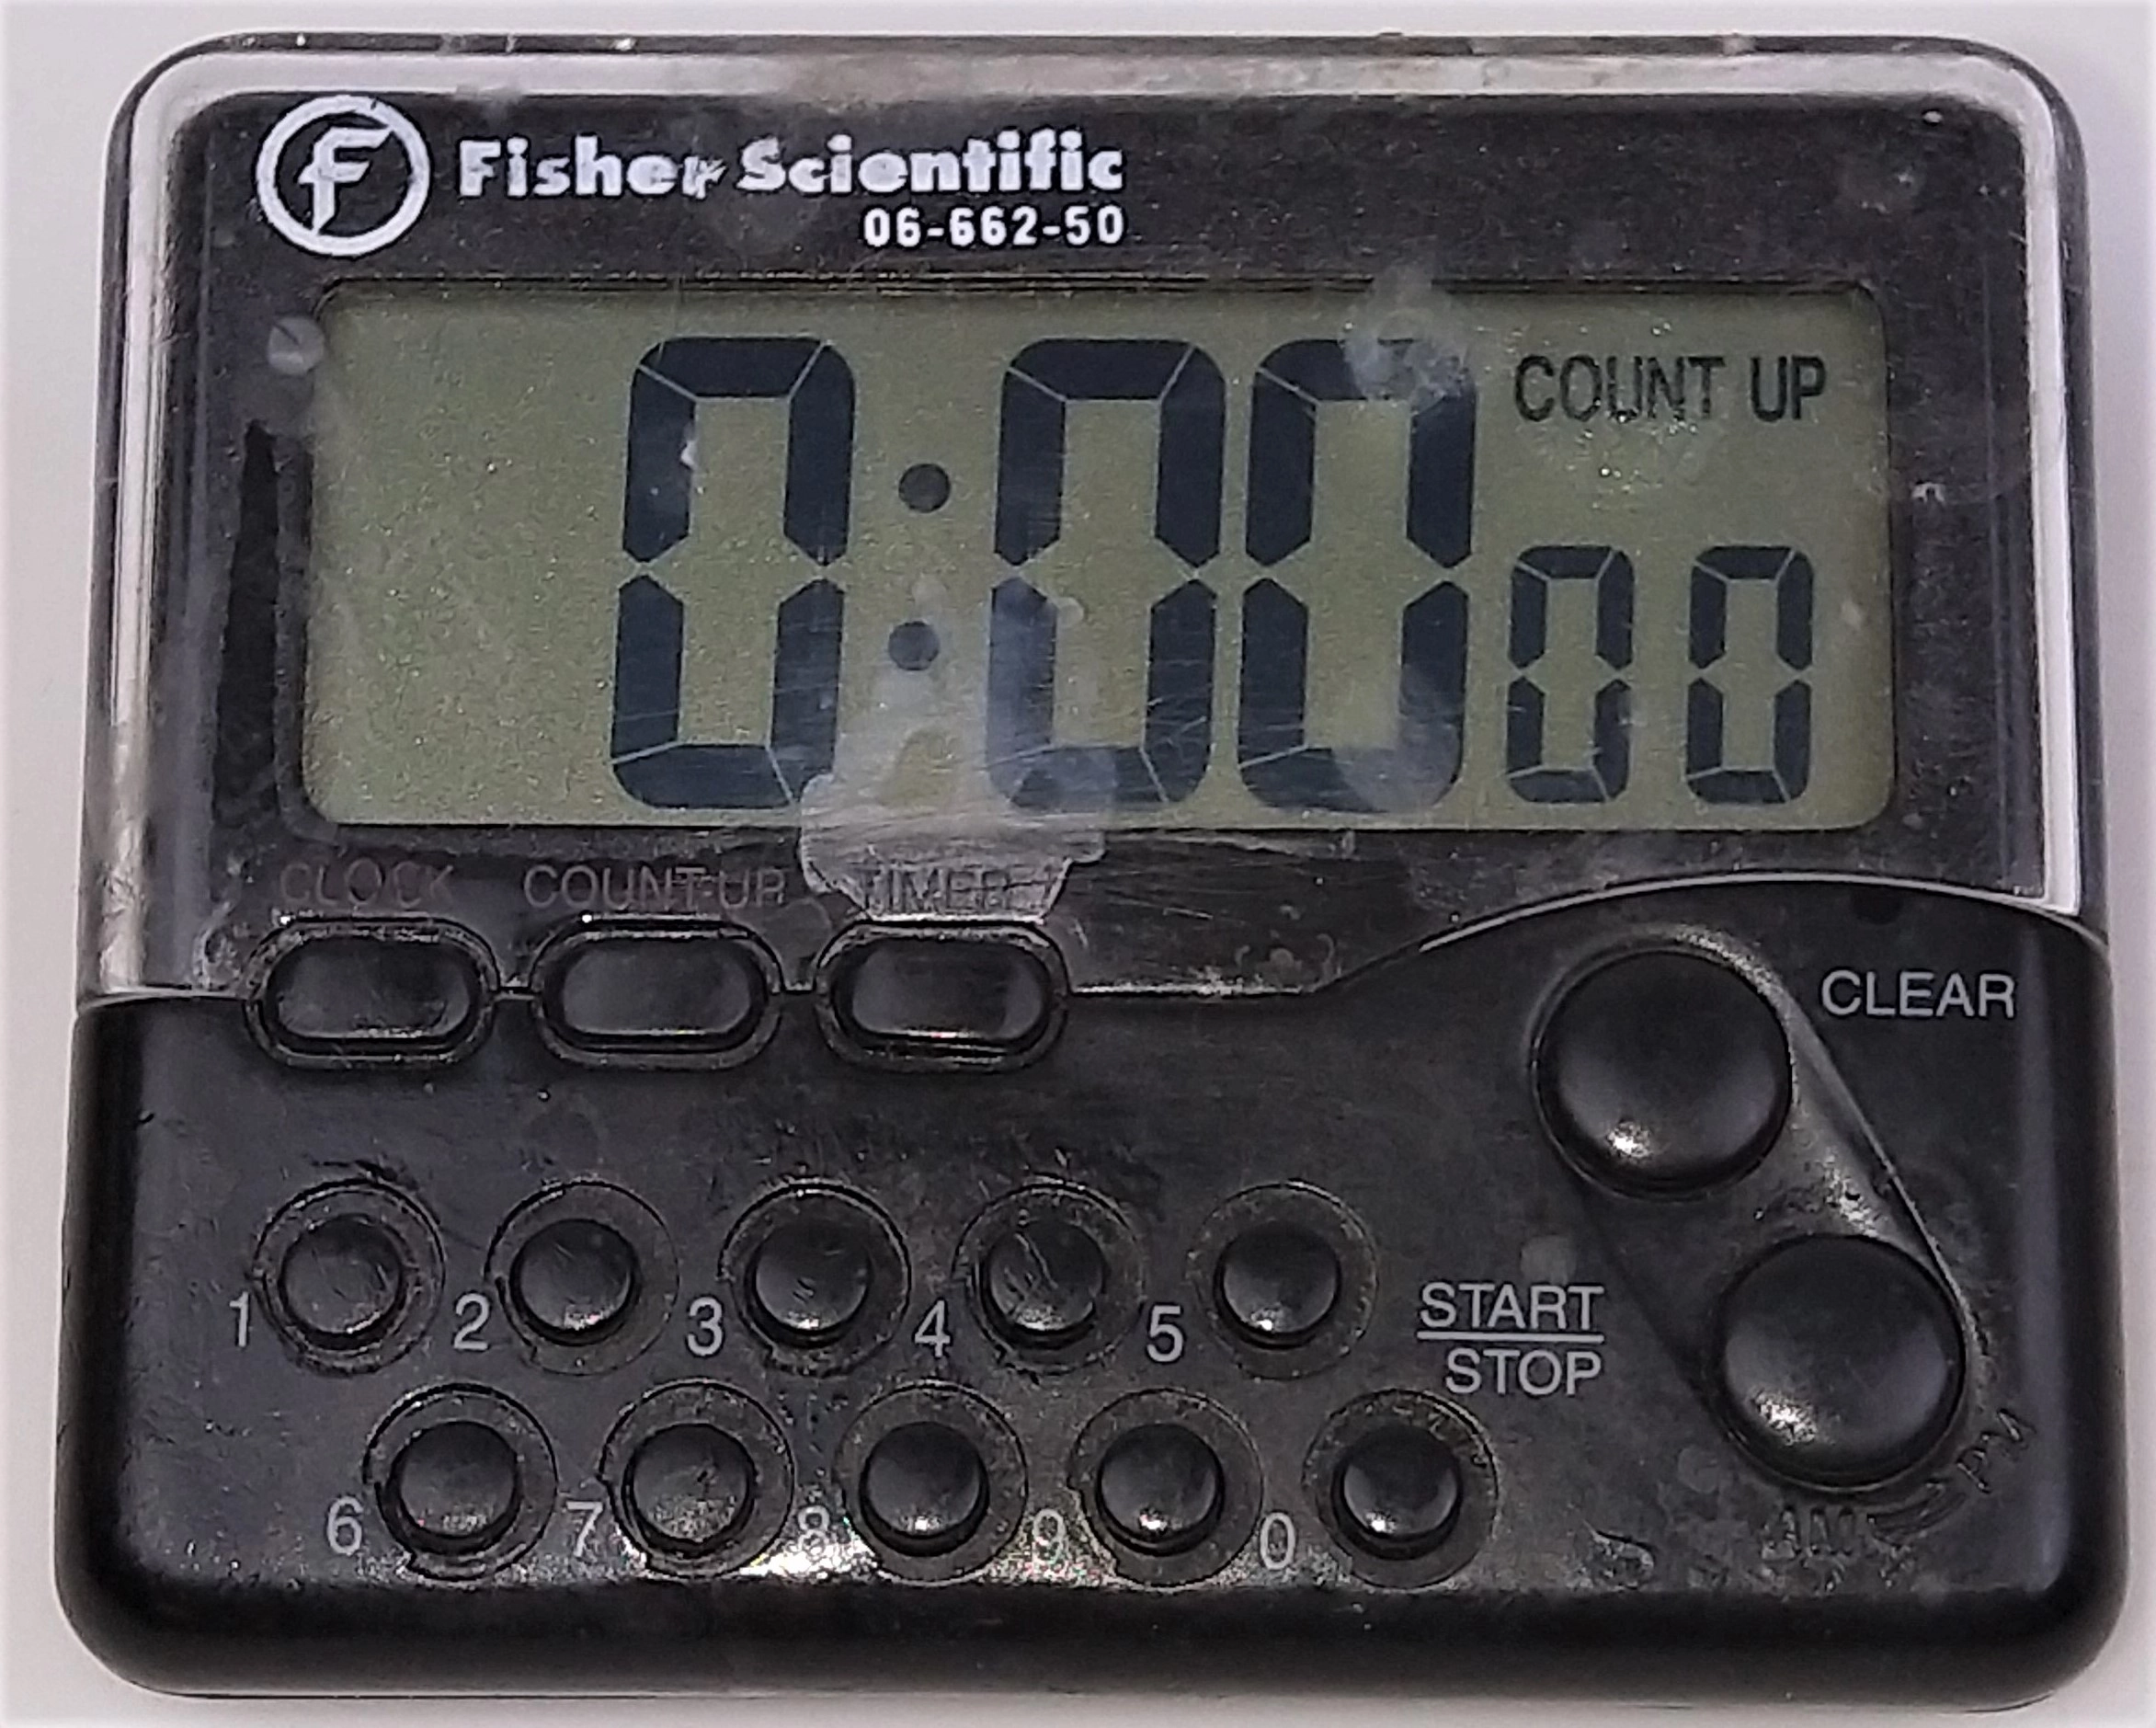 Fisher Traceable 06-662-50 Ten-Hour Timer